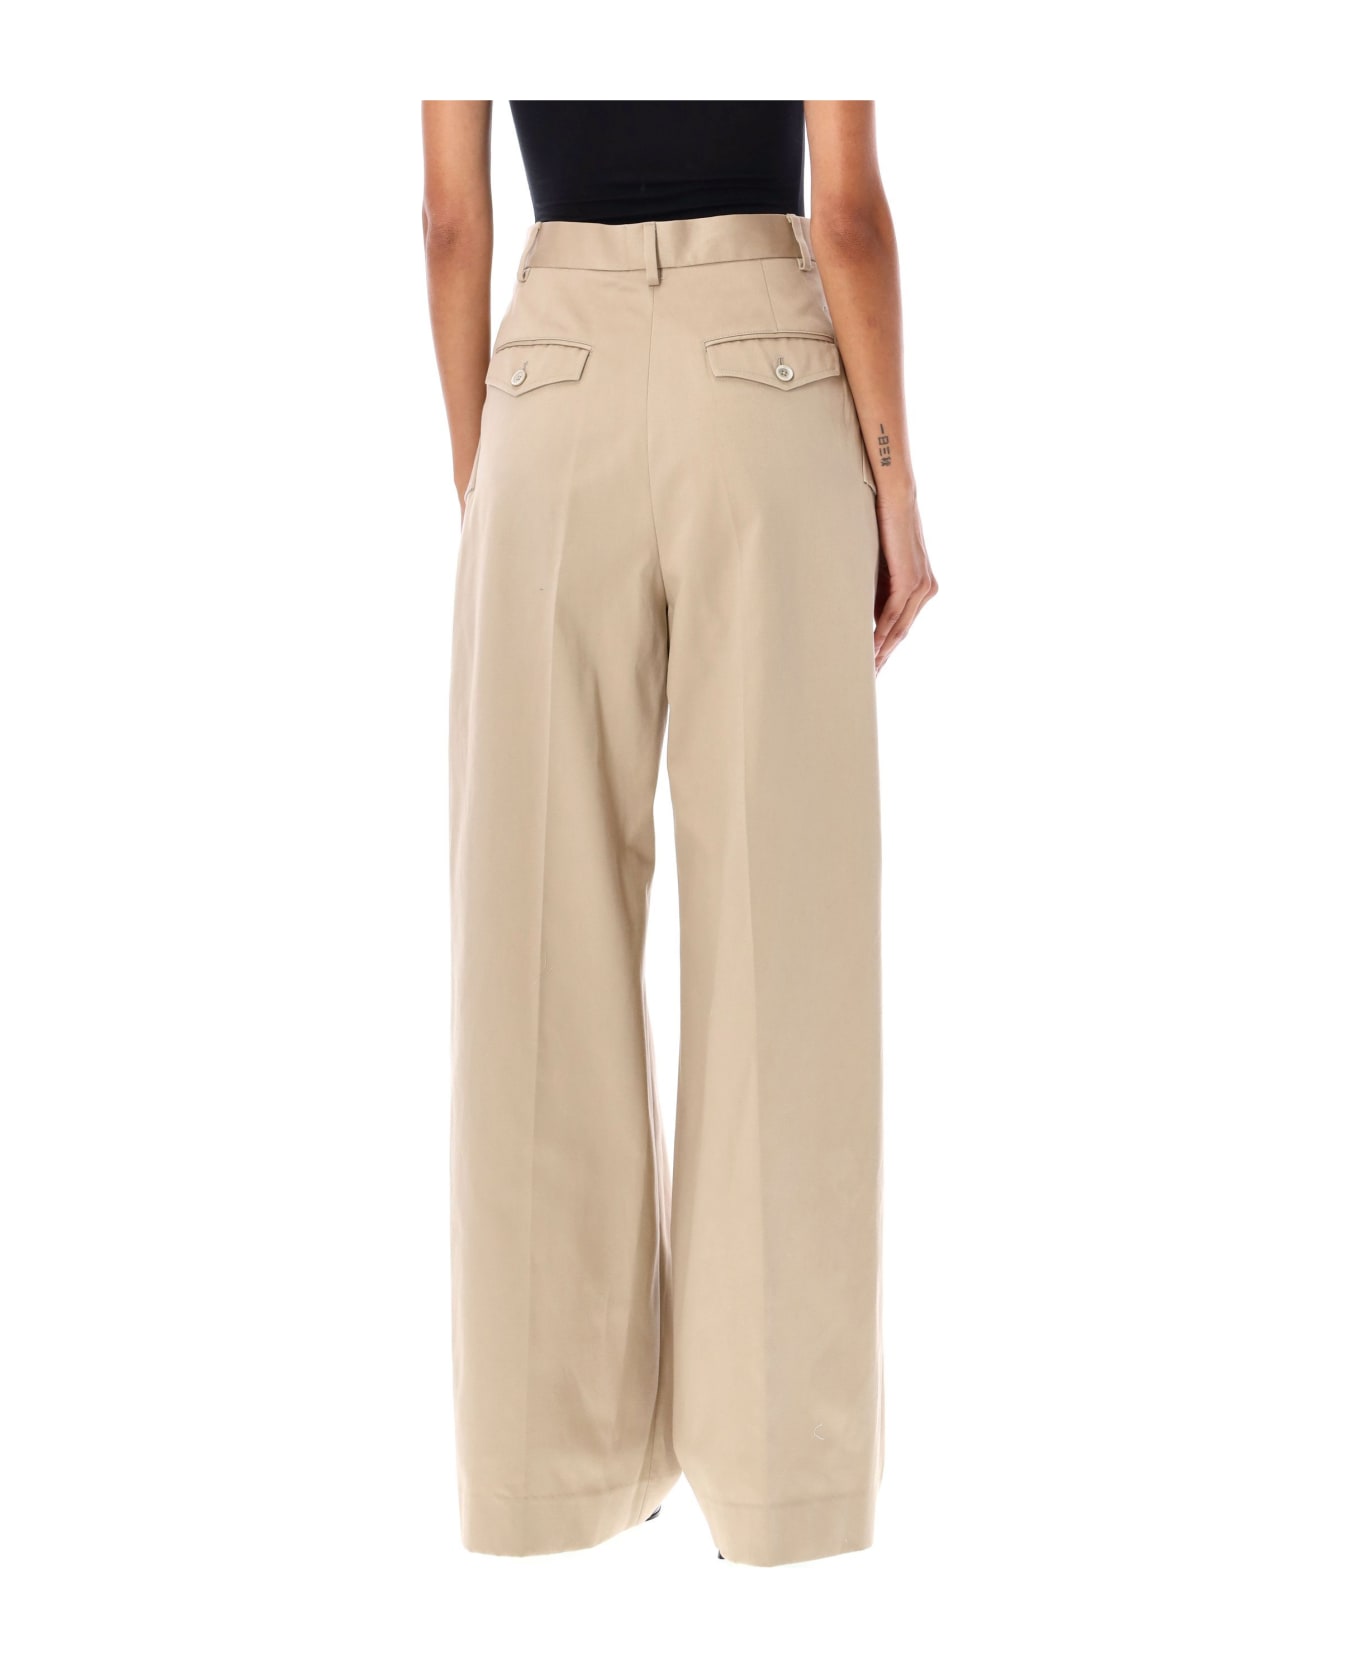 Lanvin Flared Chino Pants - BEIGE